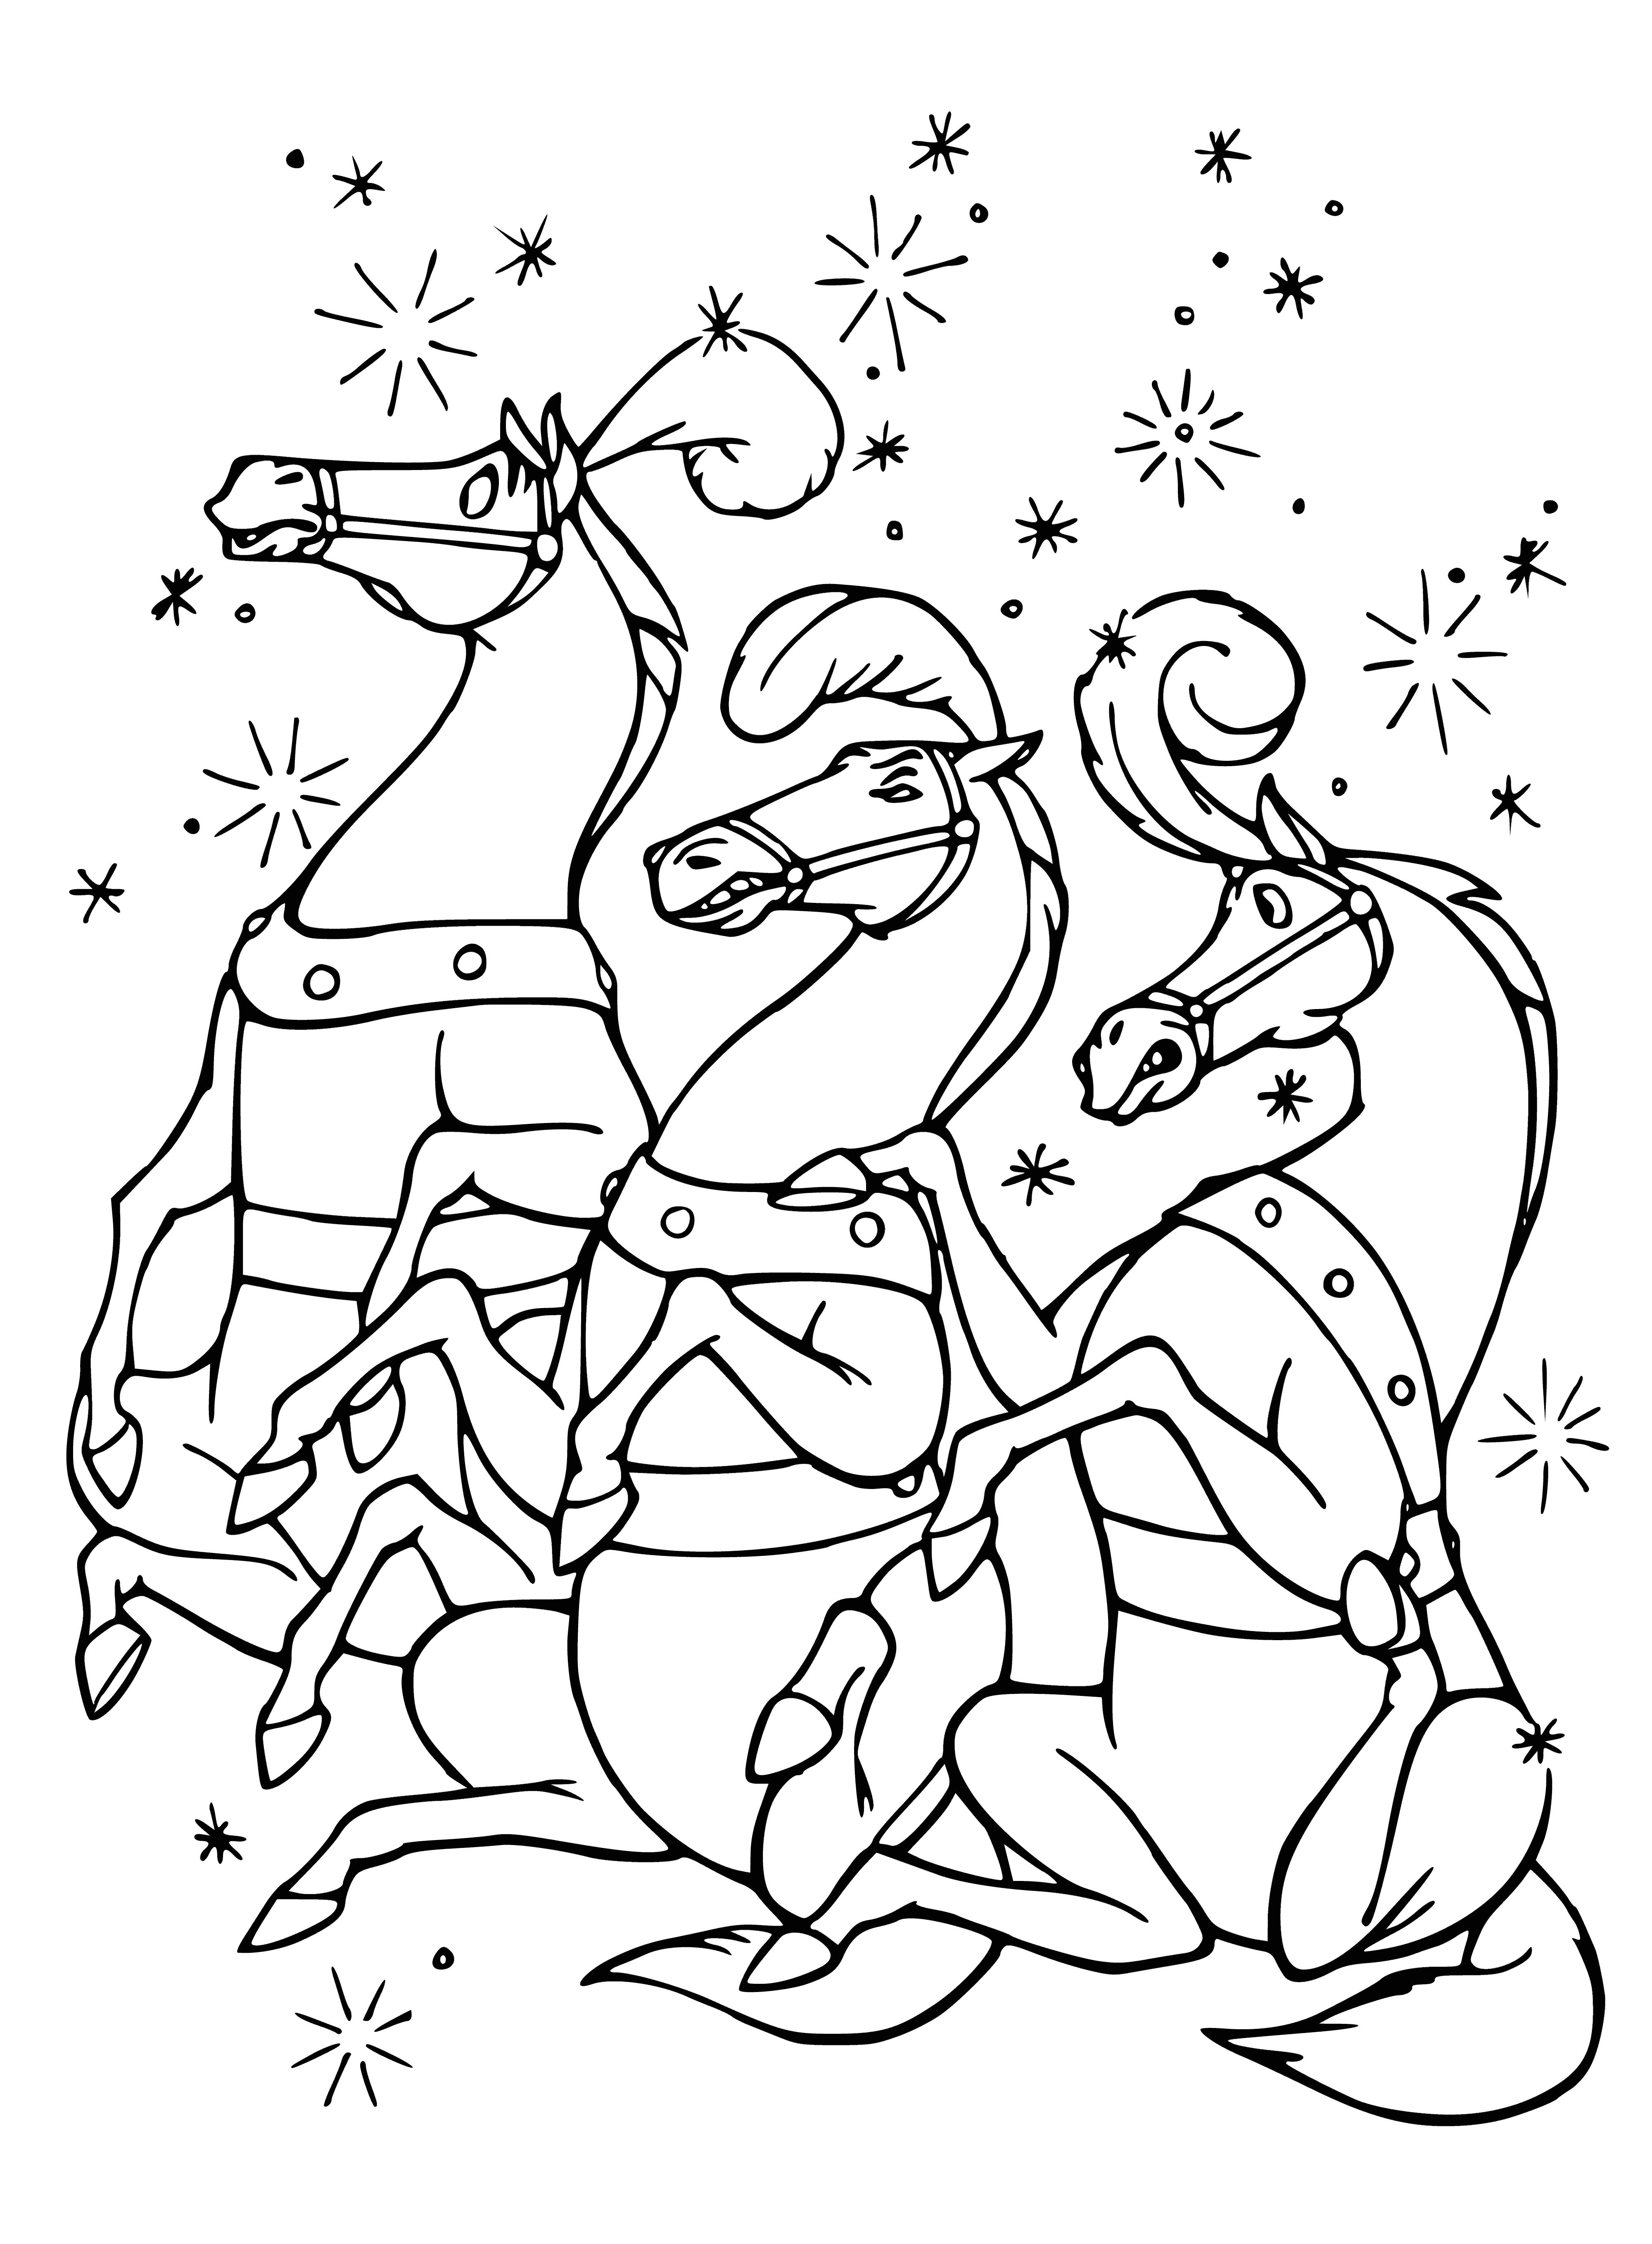 become horses coloring page